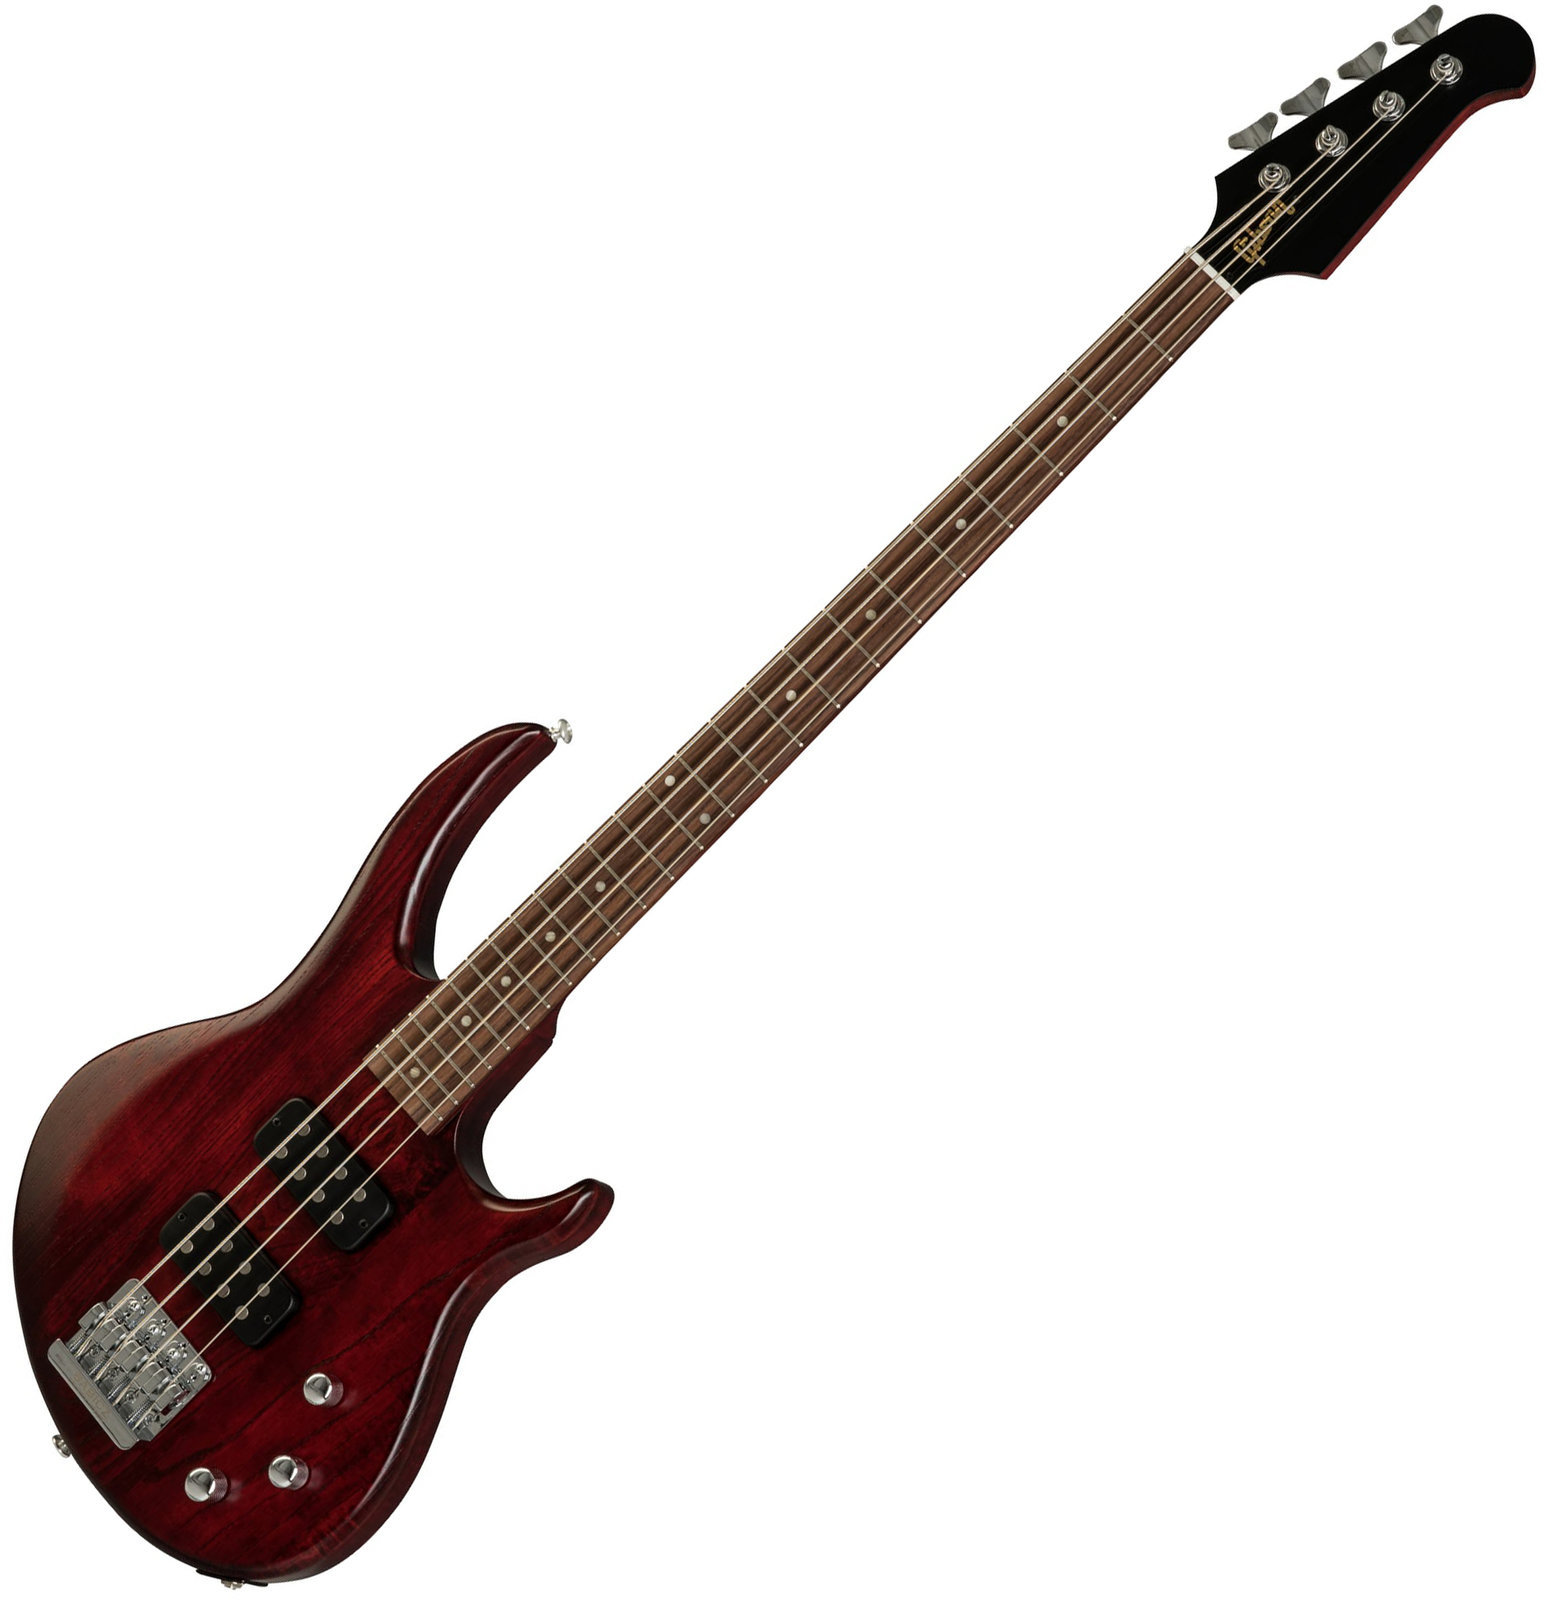 Basse électrique Gibson EB Bass 4 String 2019 Wine Red Satin